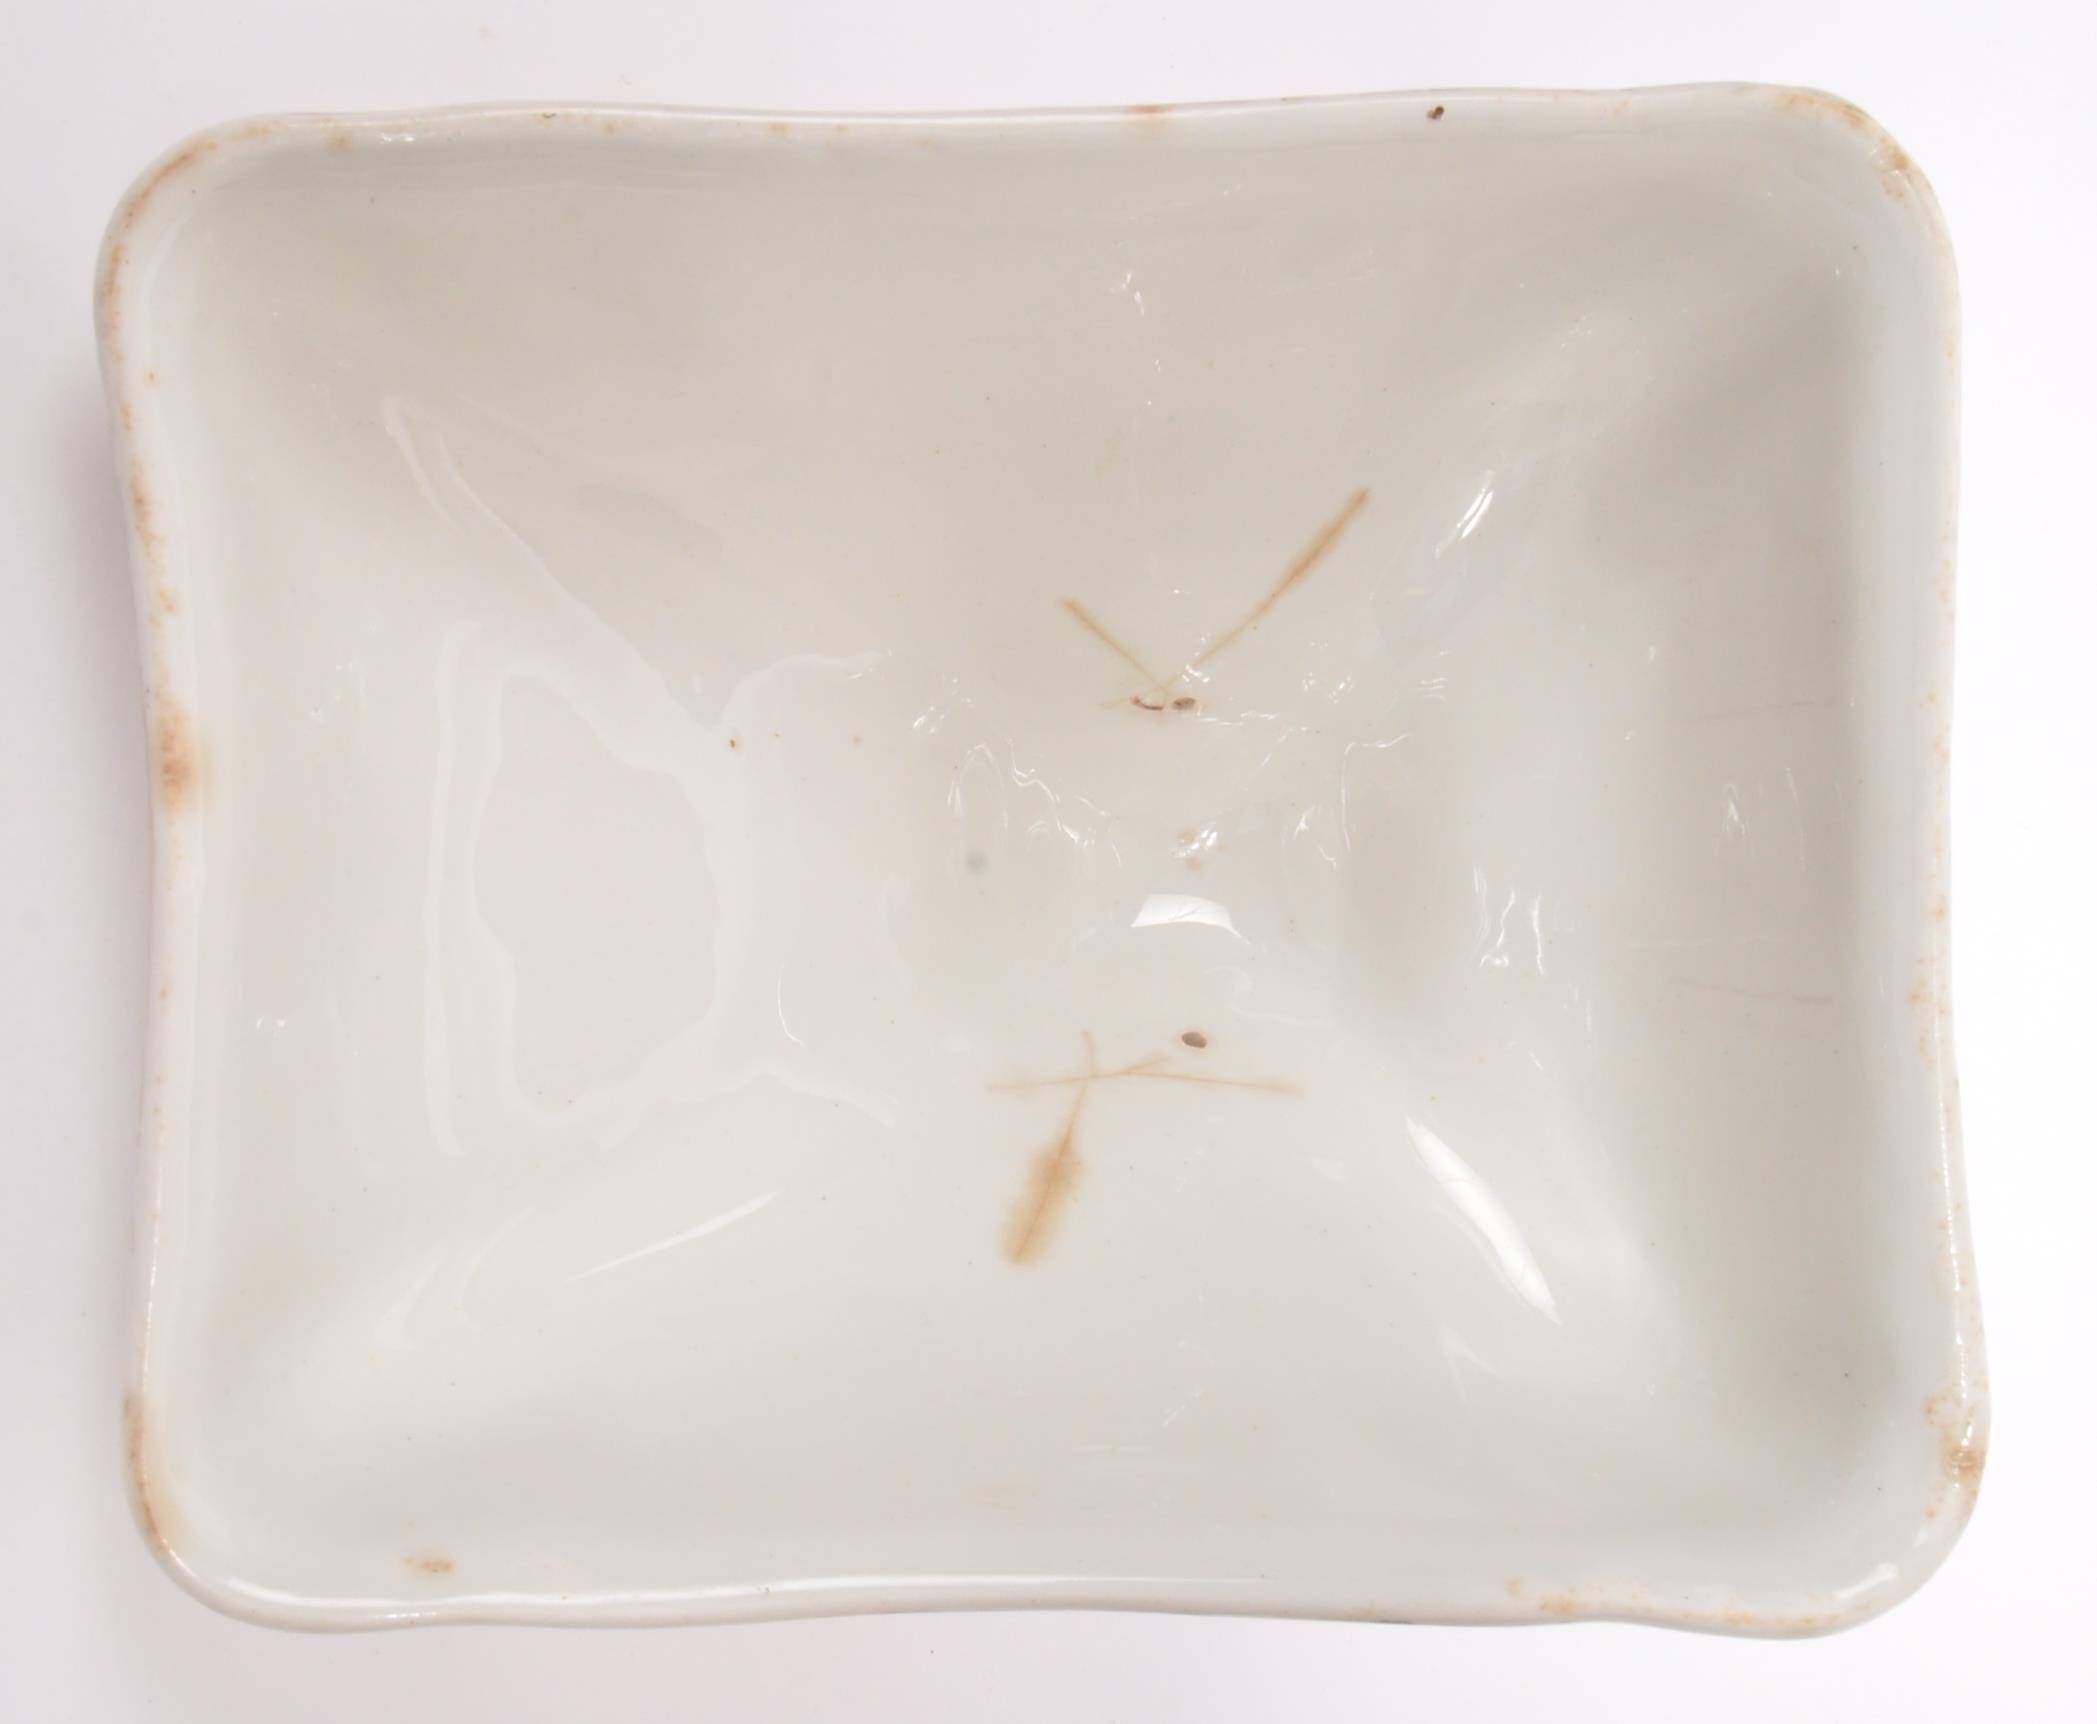 EARLY 20TH CENTURY WEDGWOOD CHEESE DISH - Image 3 of 6